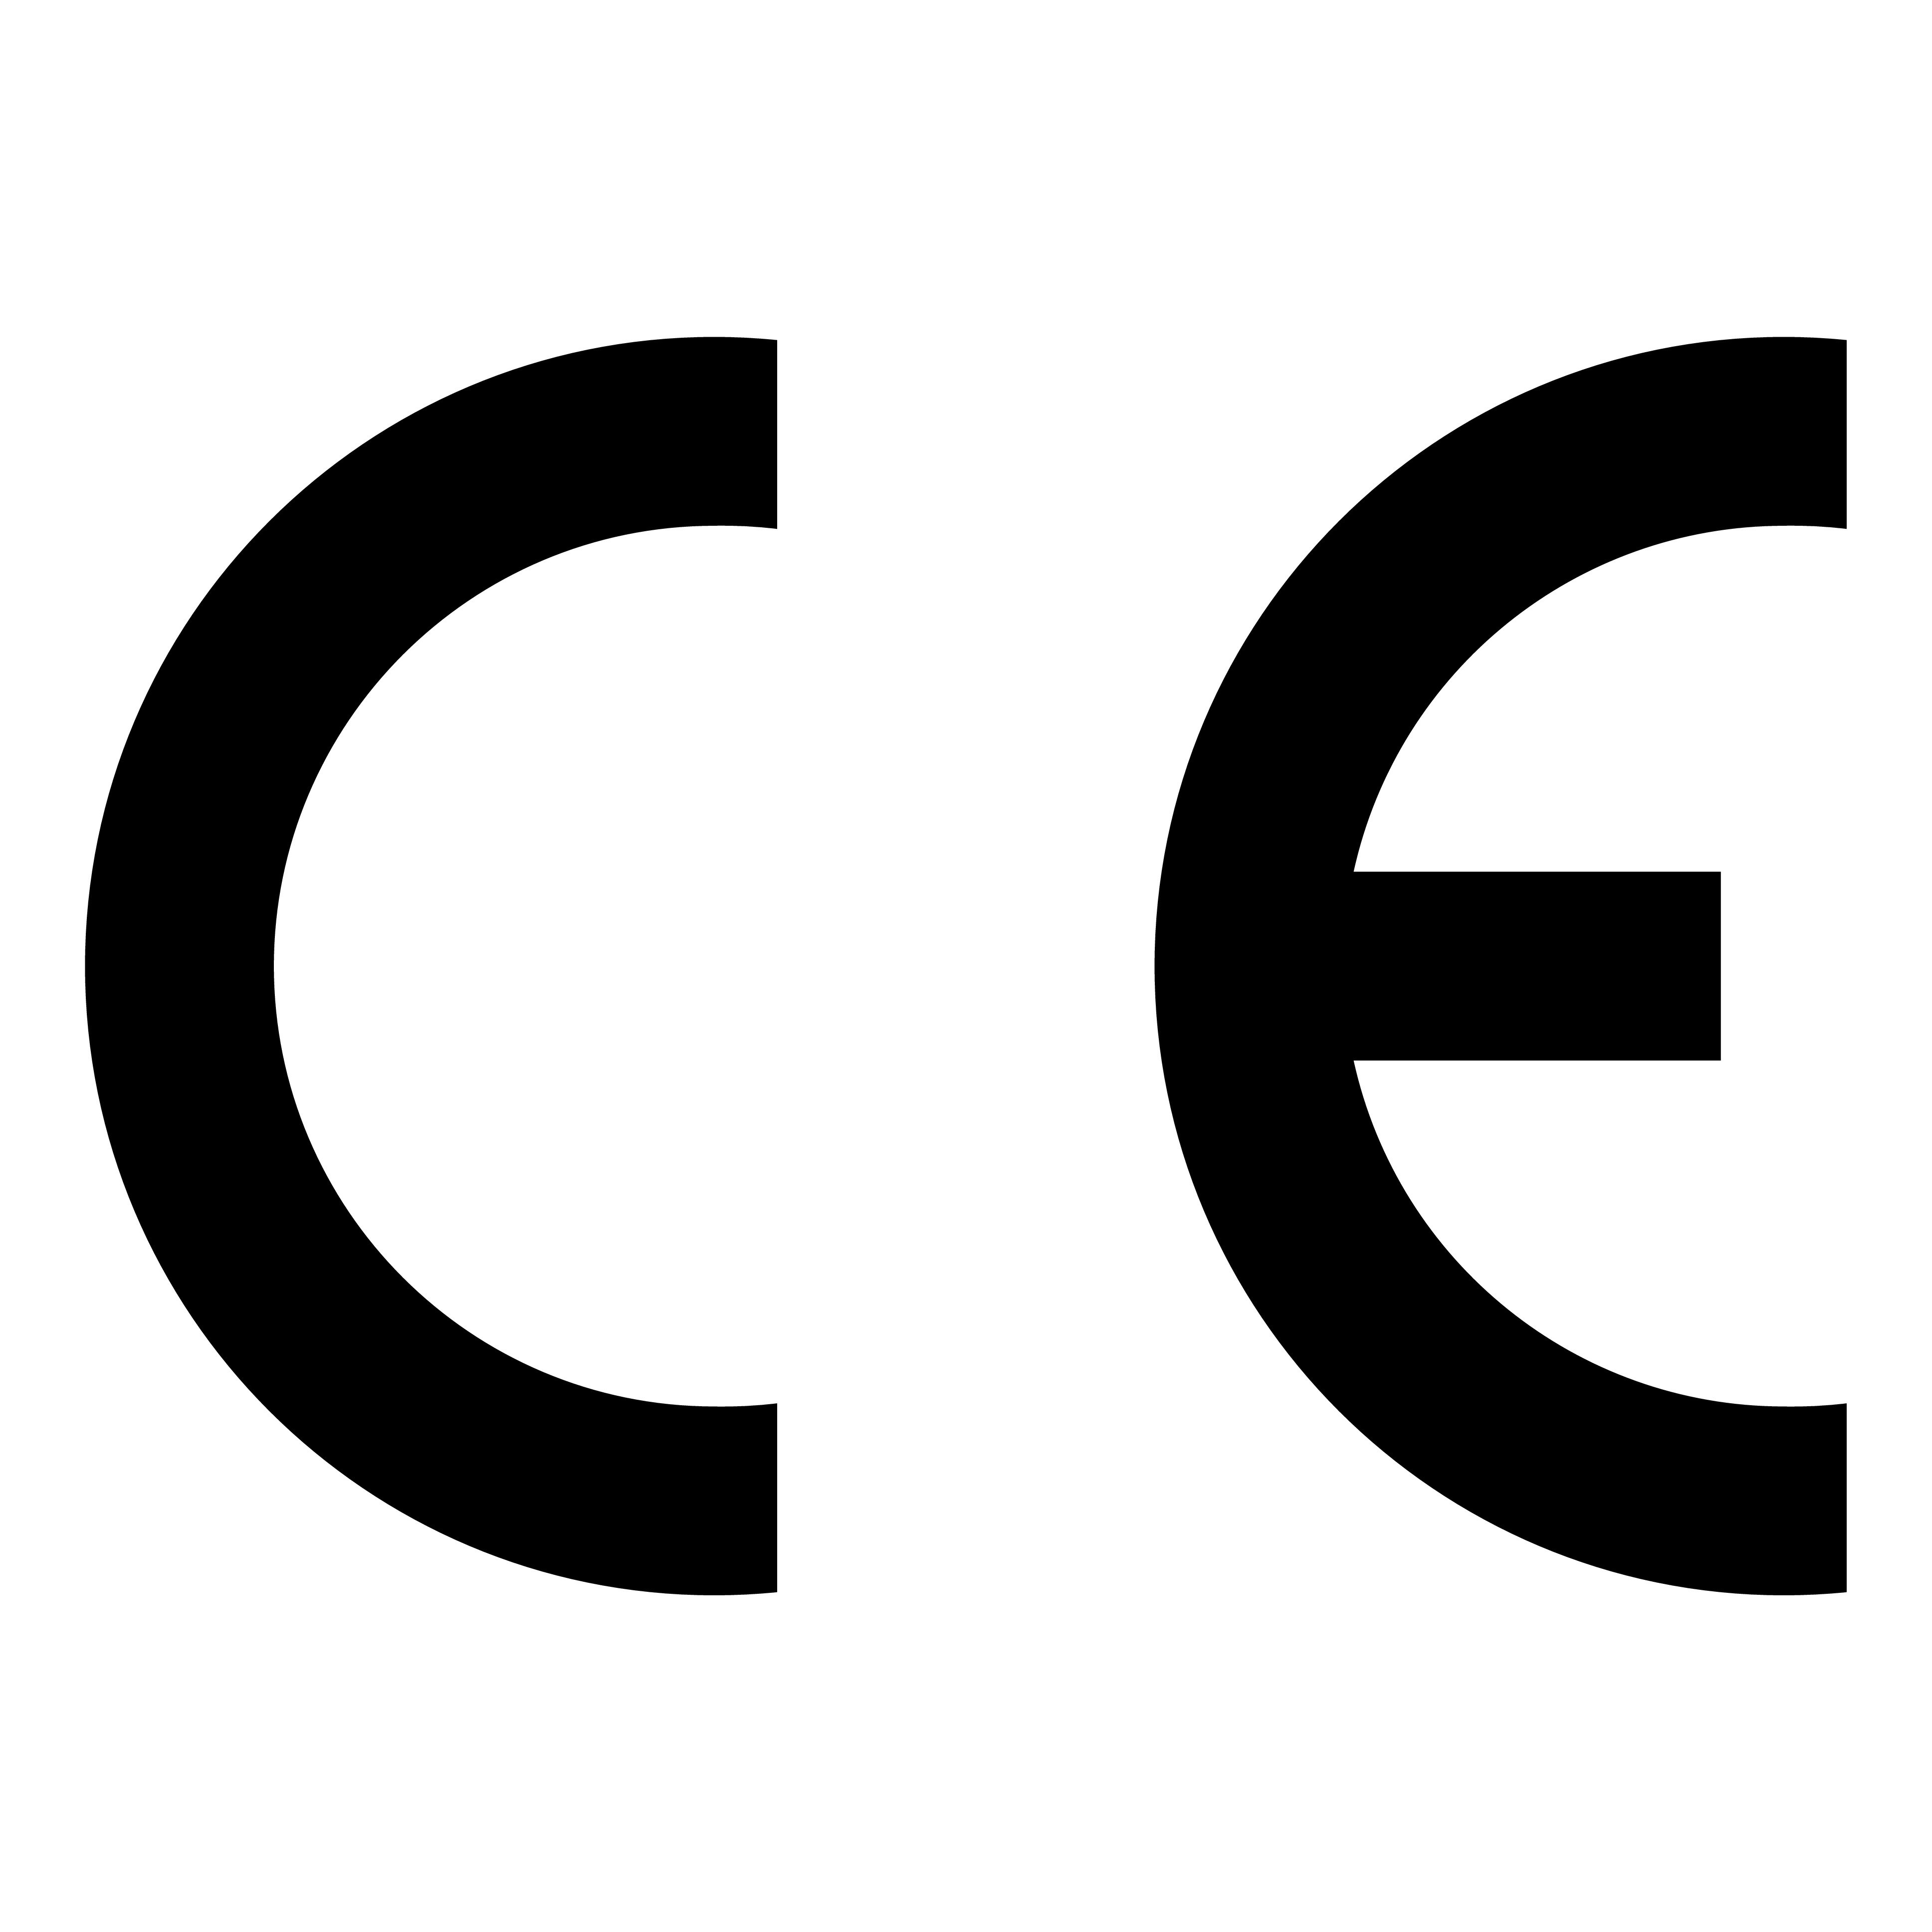 CE marking testing services from IES